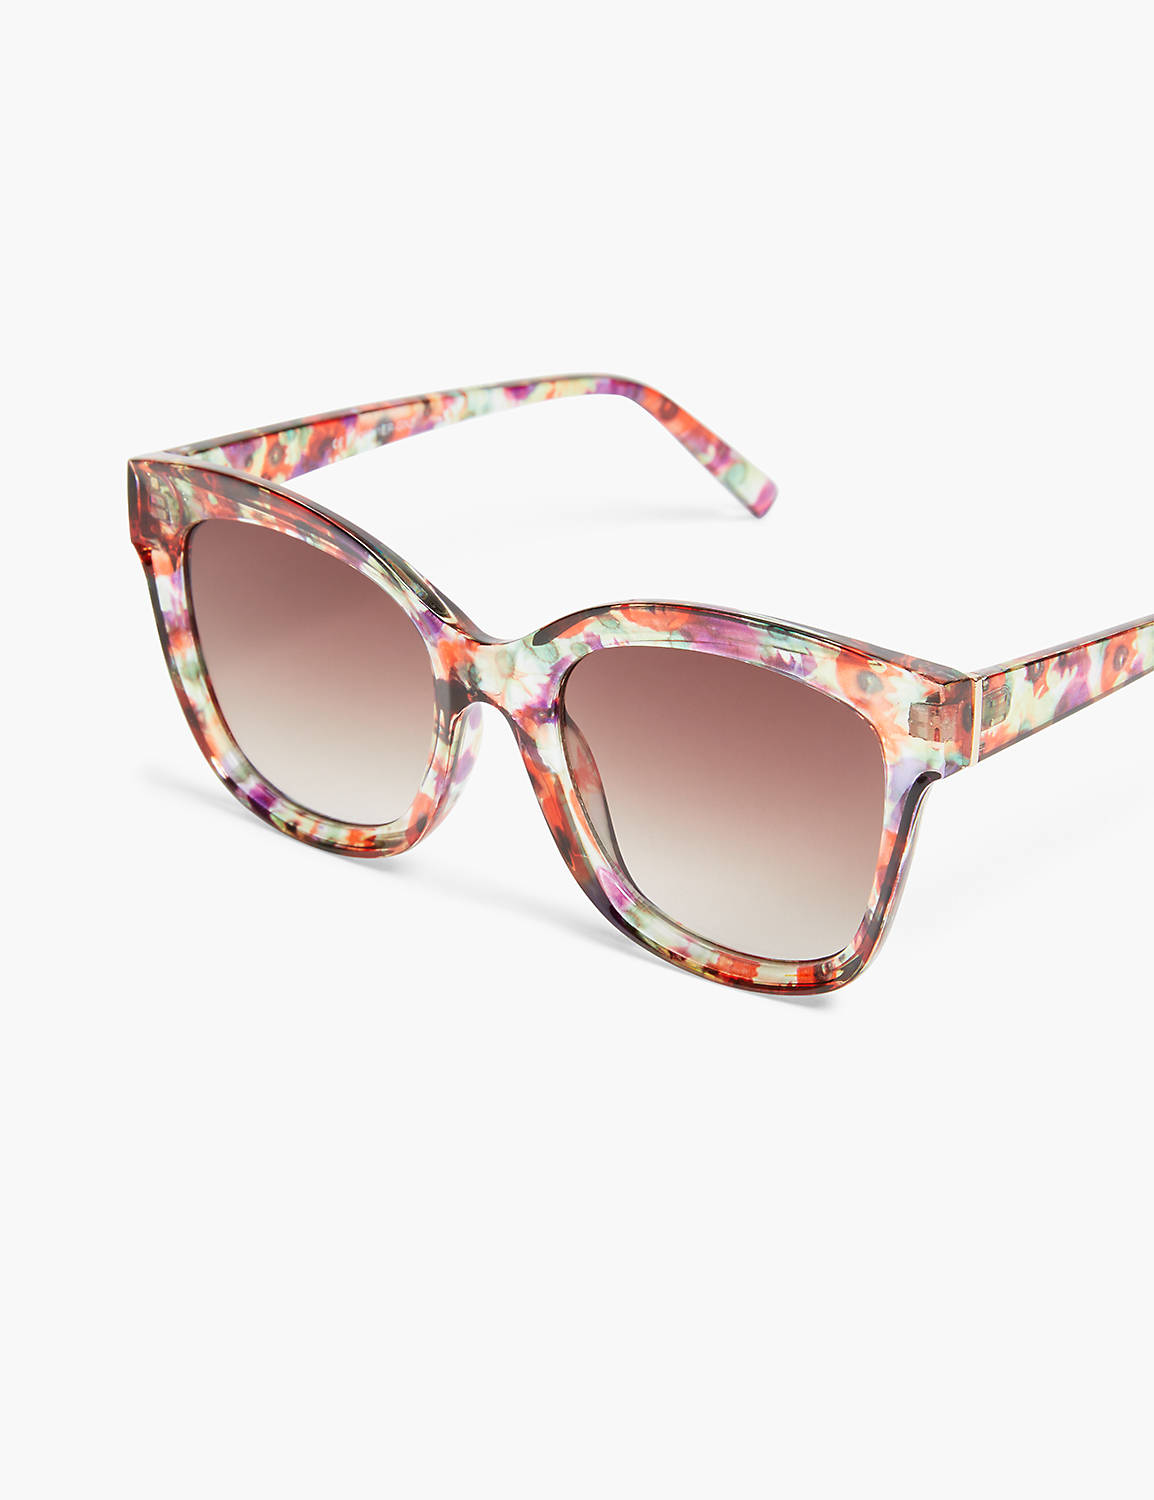 Red Floral Cat Eye Sunglasses Product Image 1